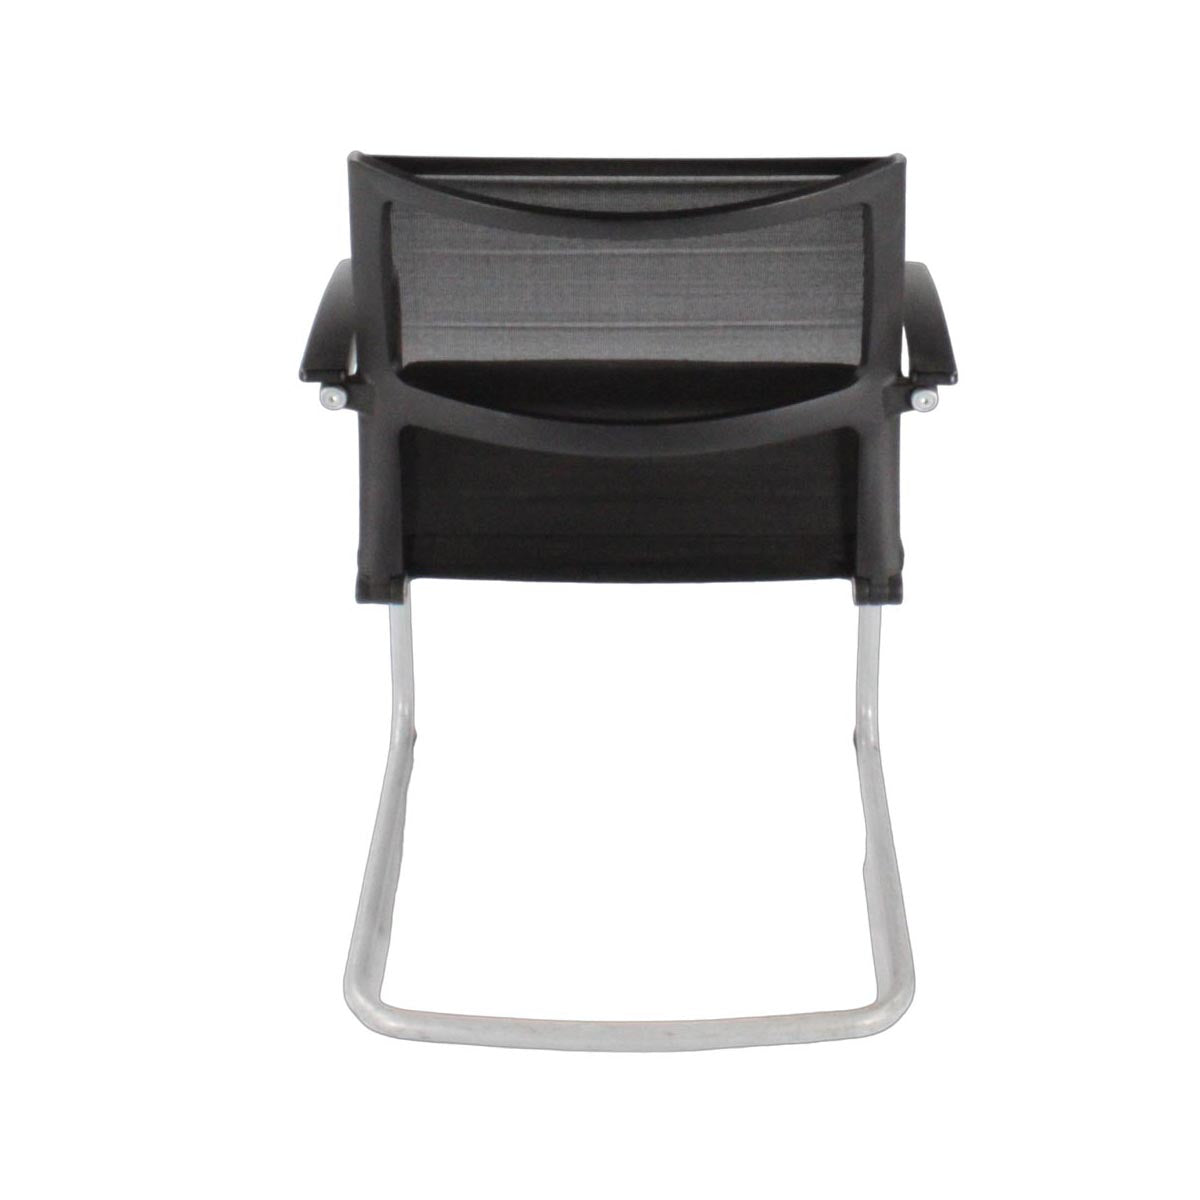 Sedus: Open Up Cantilever Chair with Mesh Back in Black Fabric - Refurbished